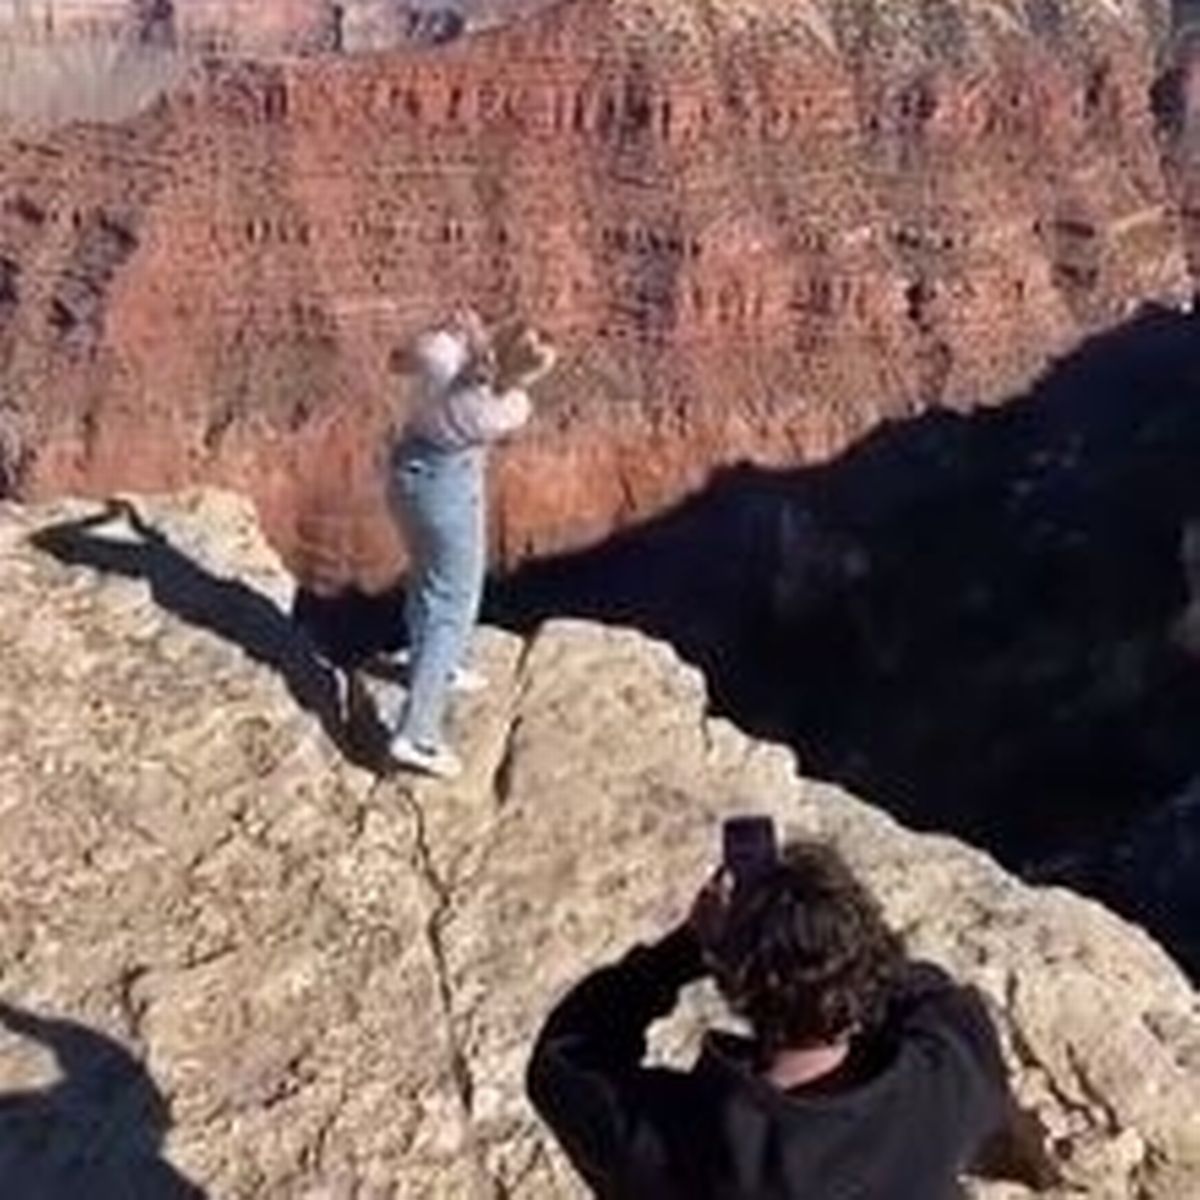 TikToker faces criminal charges for hitting golf ball into the Grand Canyon